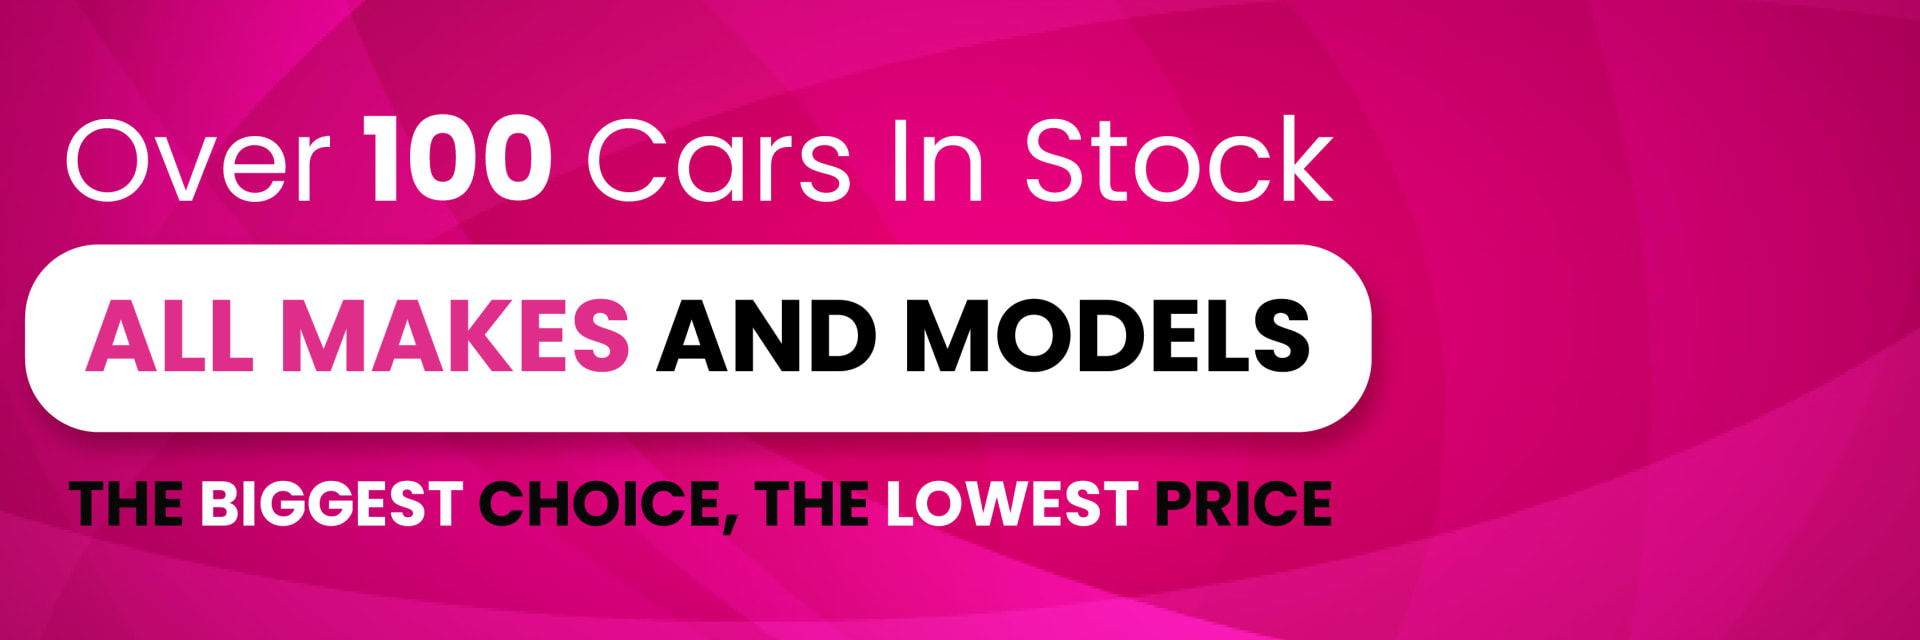 Over 100 cars in stock!